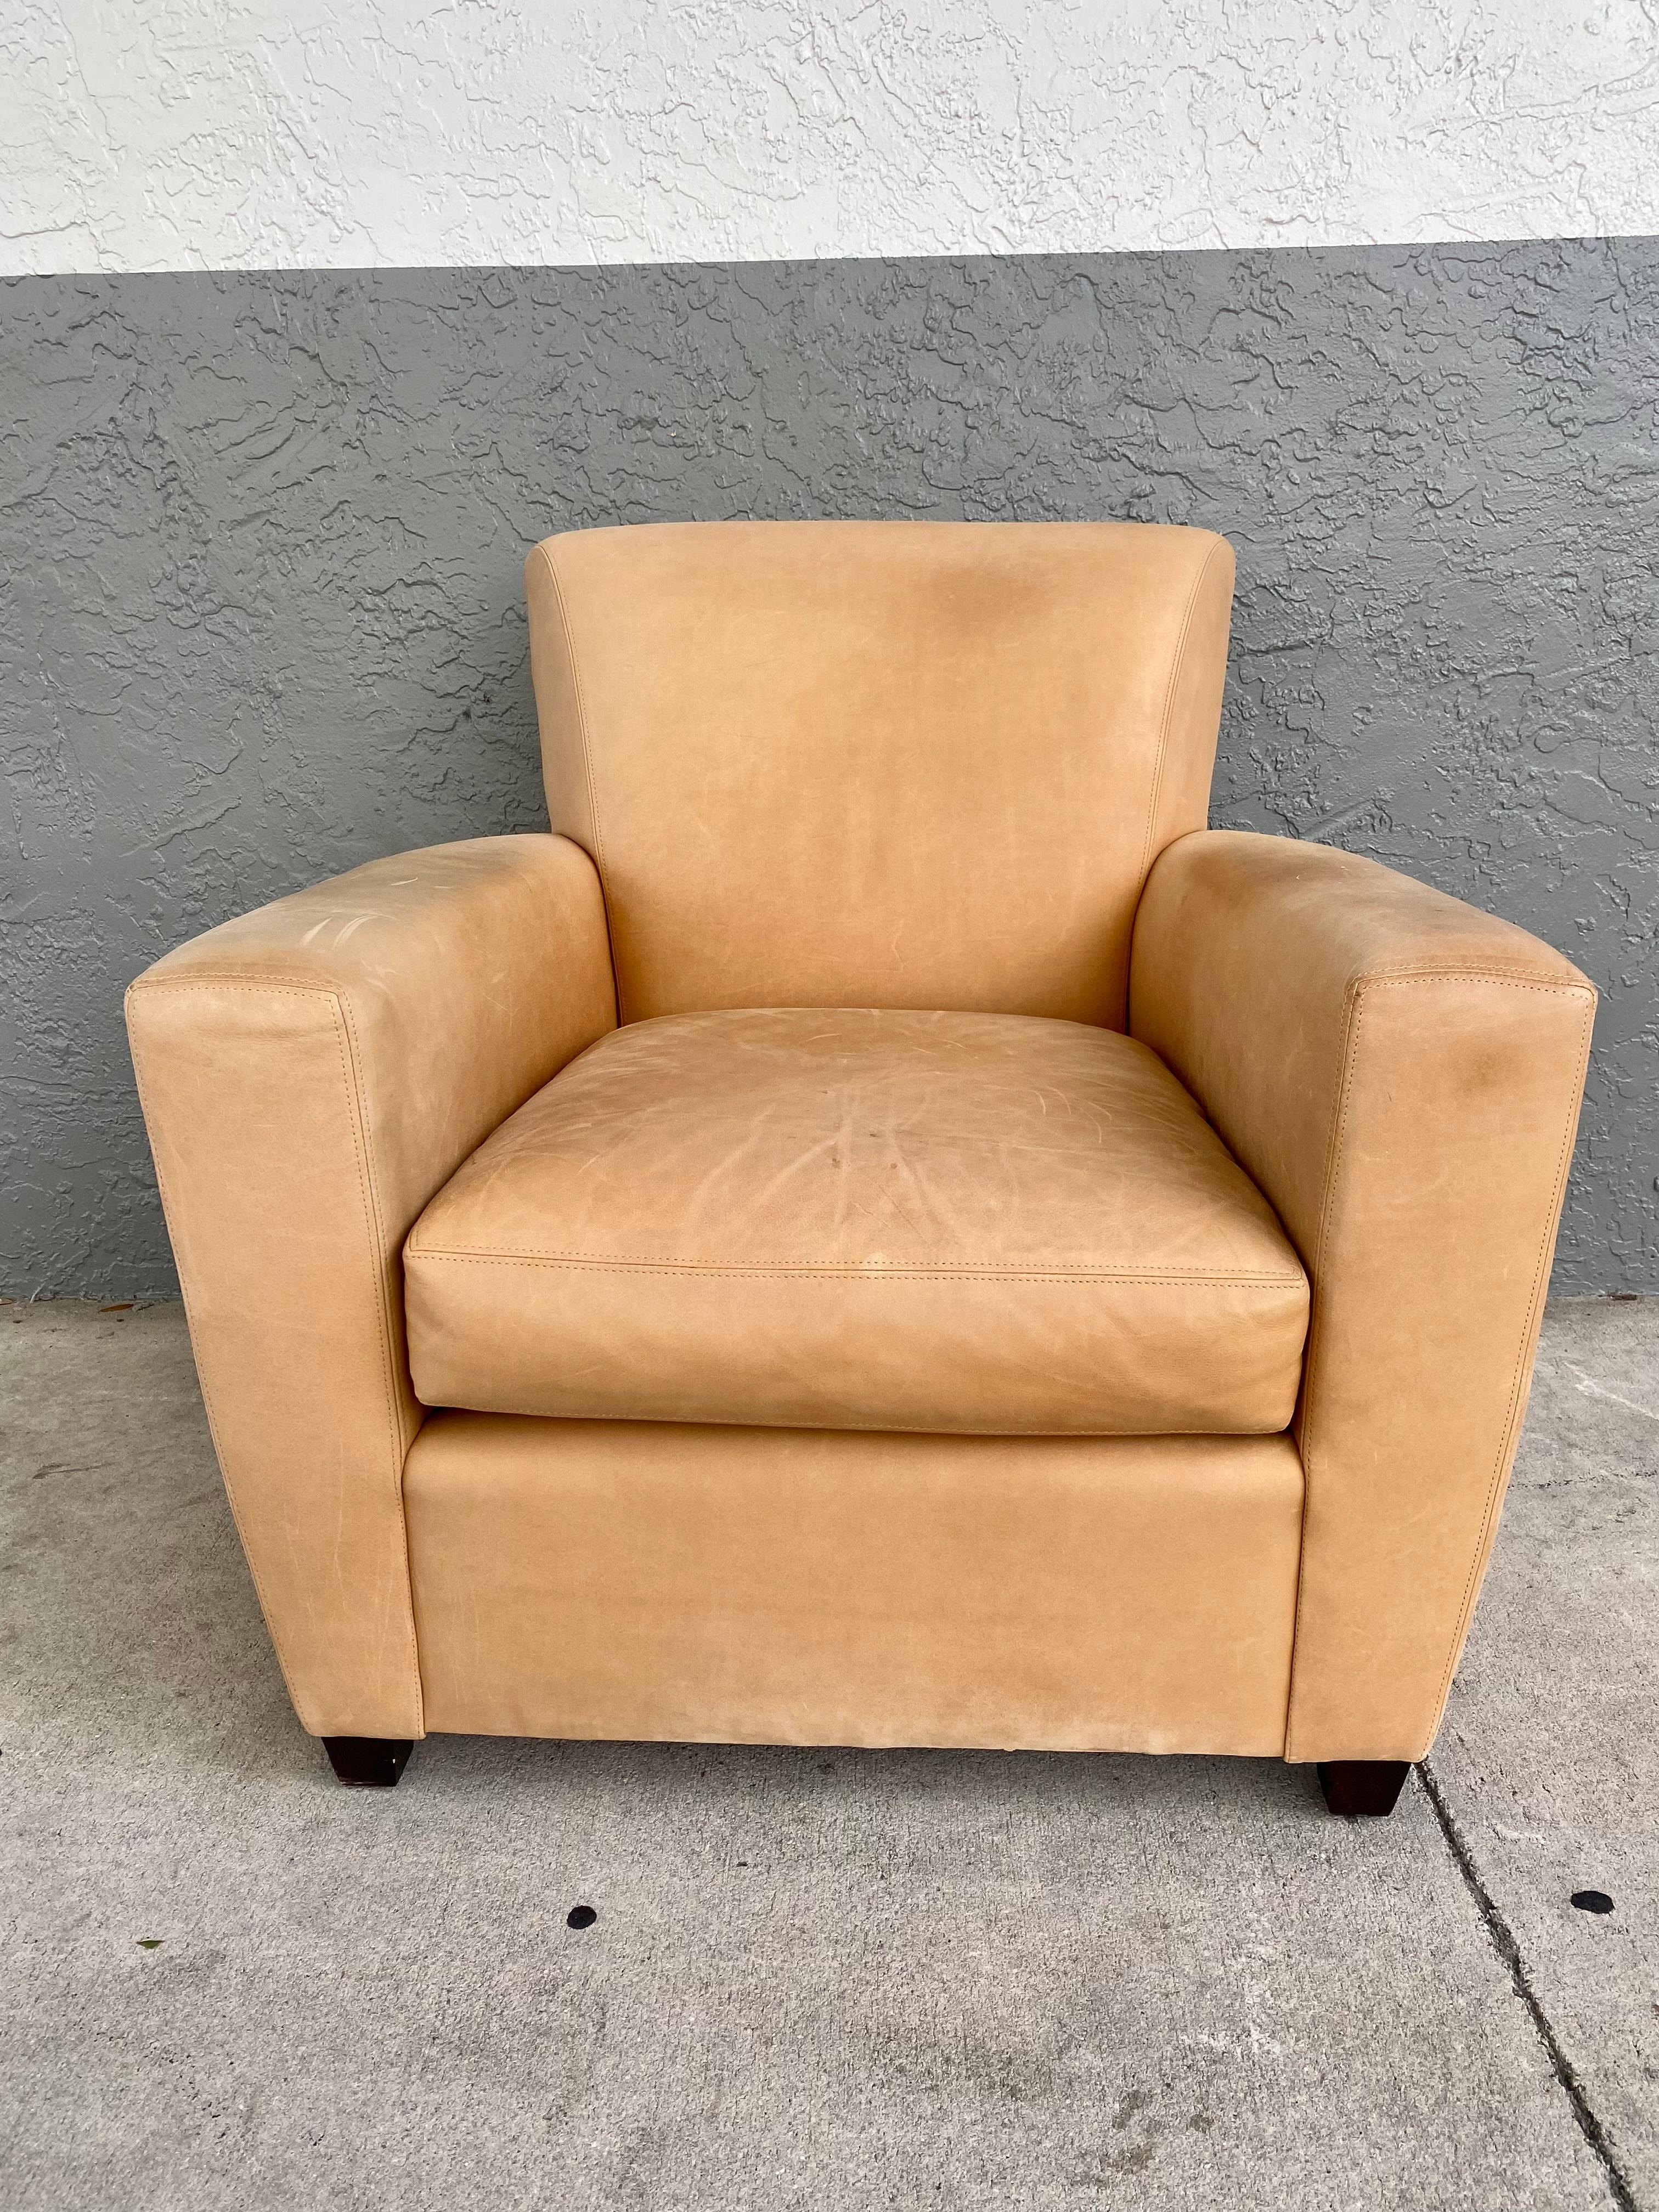 Designed by Coach, Inc. for Baker Natural Leather Curved Chair and Ottoman In Good Condition For Sale In Fort Lauderdale, FL